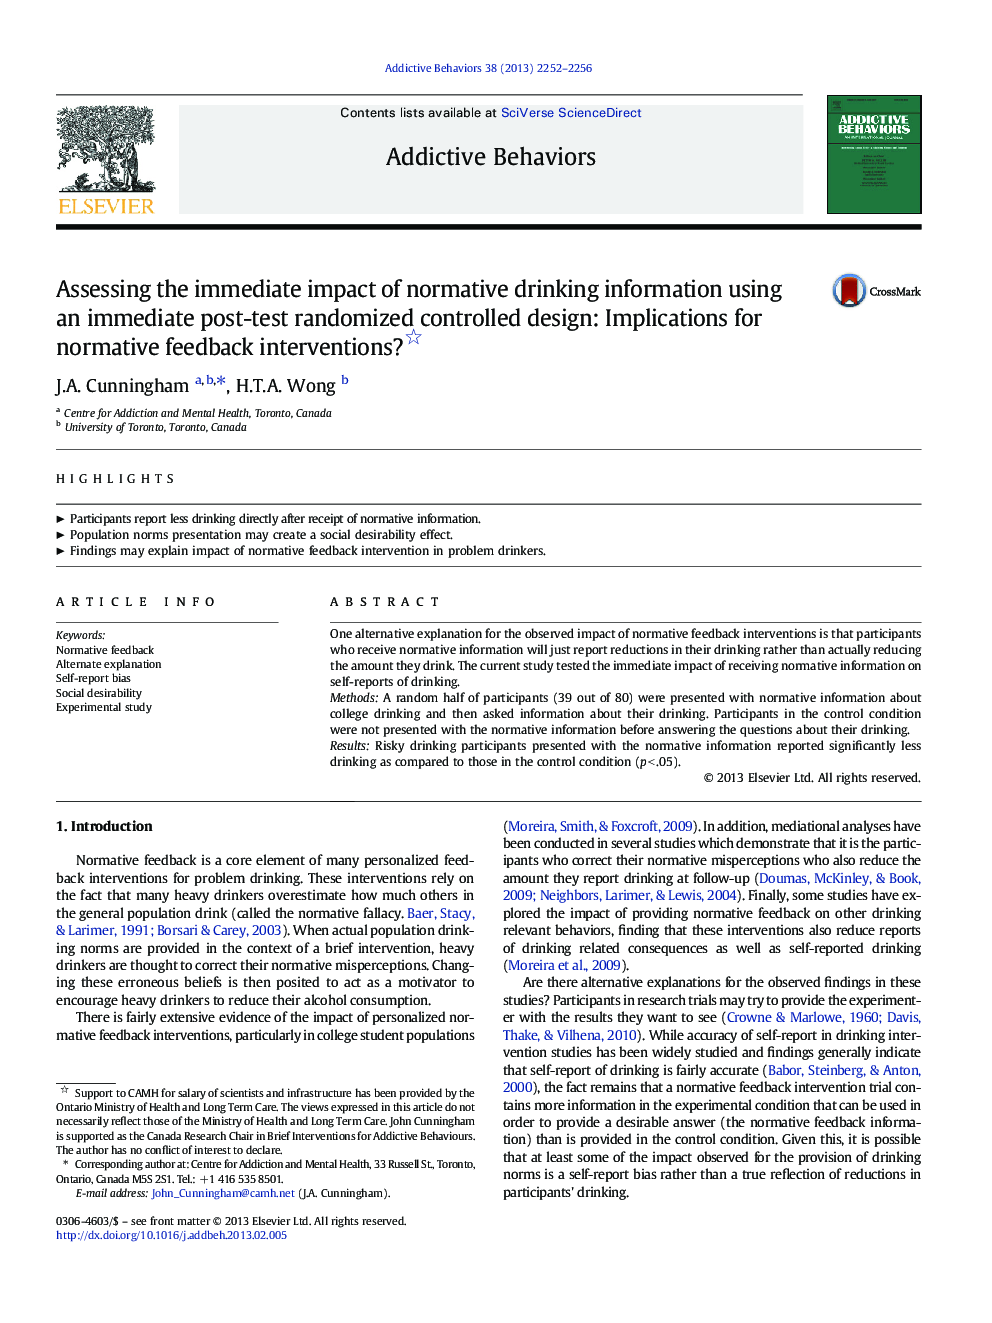 Assessing the immediate impact of normative drinking information using an immediate post-test randomized controlled design: Implications for normative feedback interventions? 